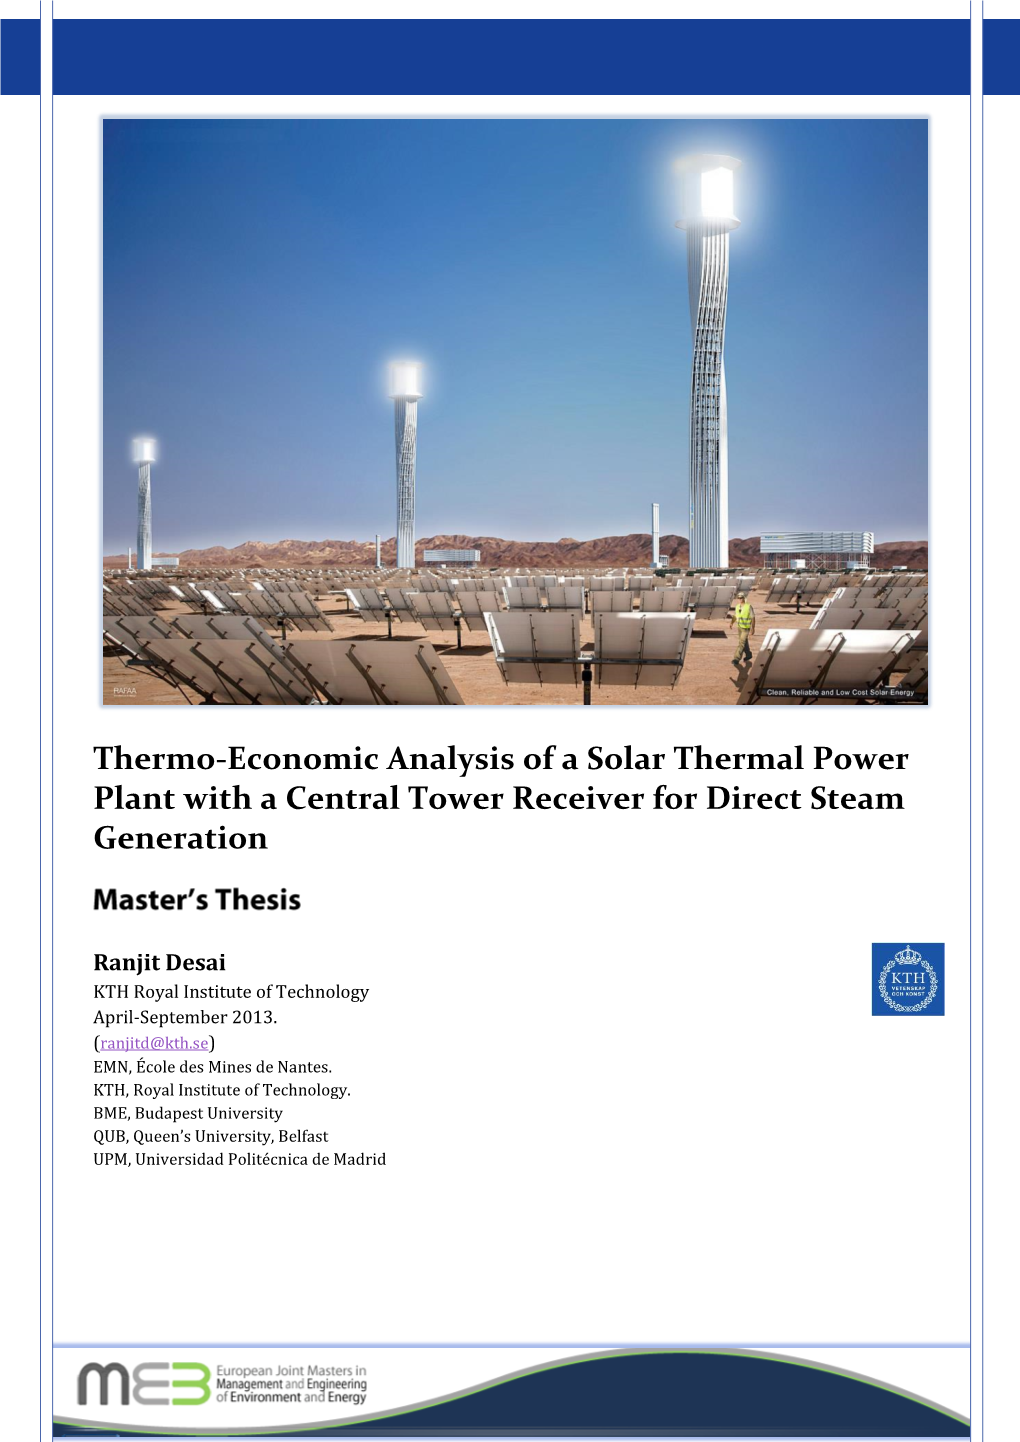 Thermo-Economic Analysis of a Solar Thermal Power Plant with a Central Tower Receiver for Direct Steam Generation